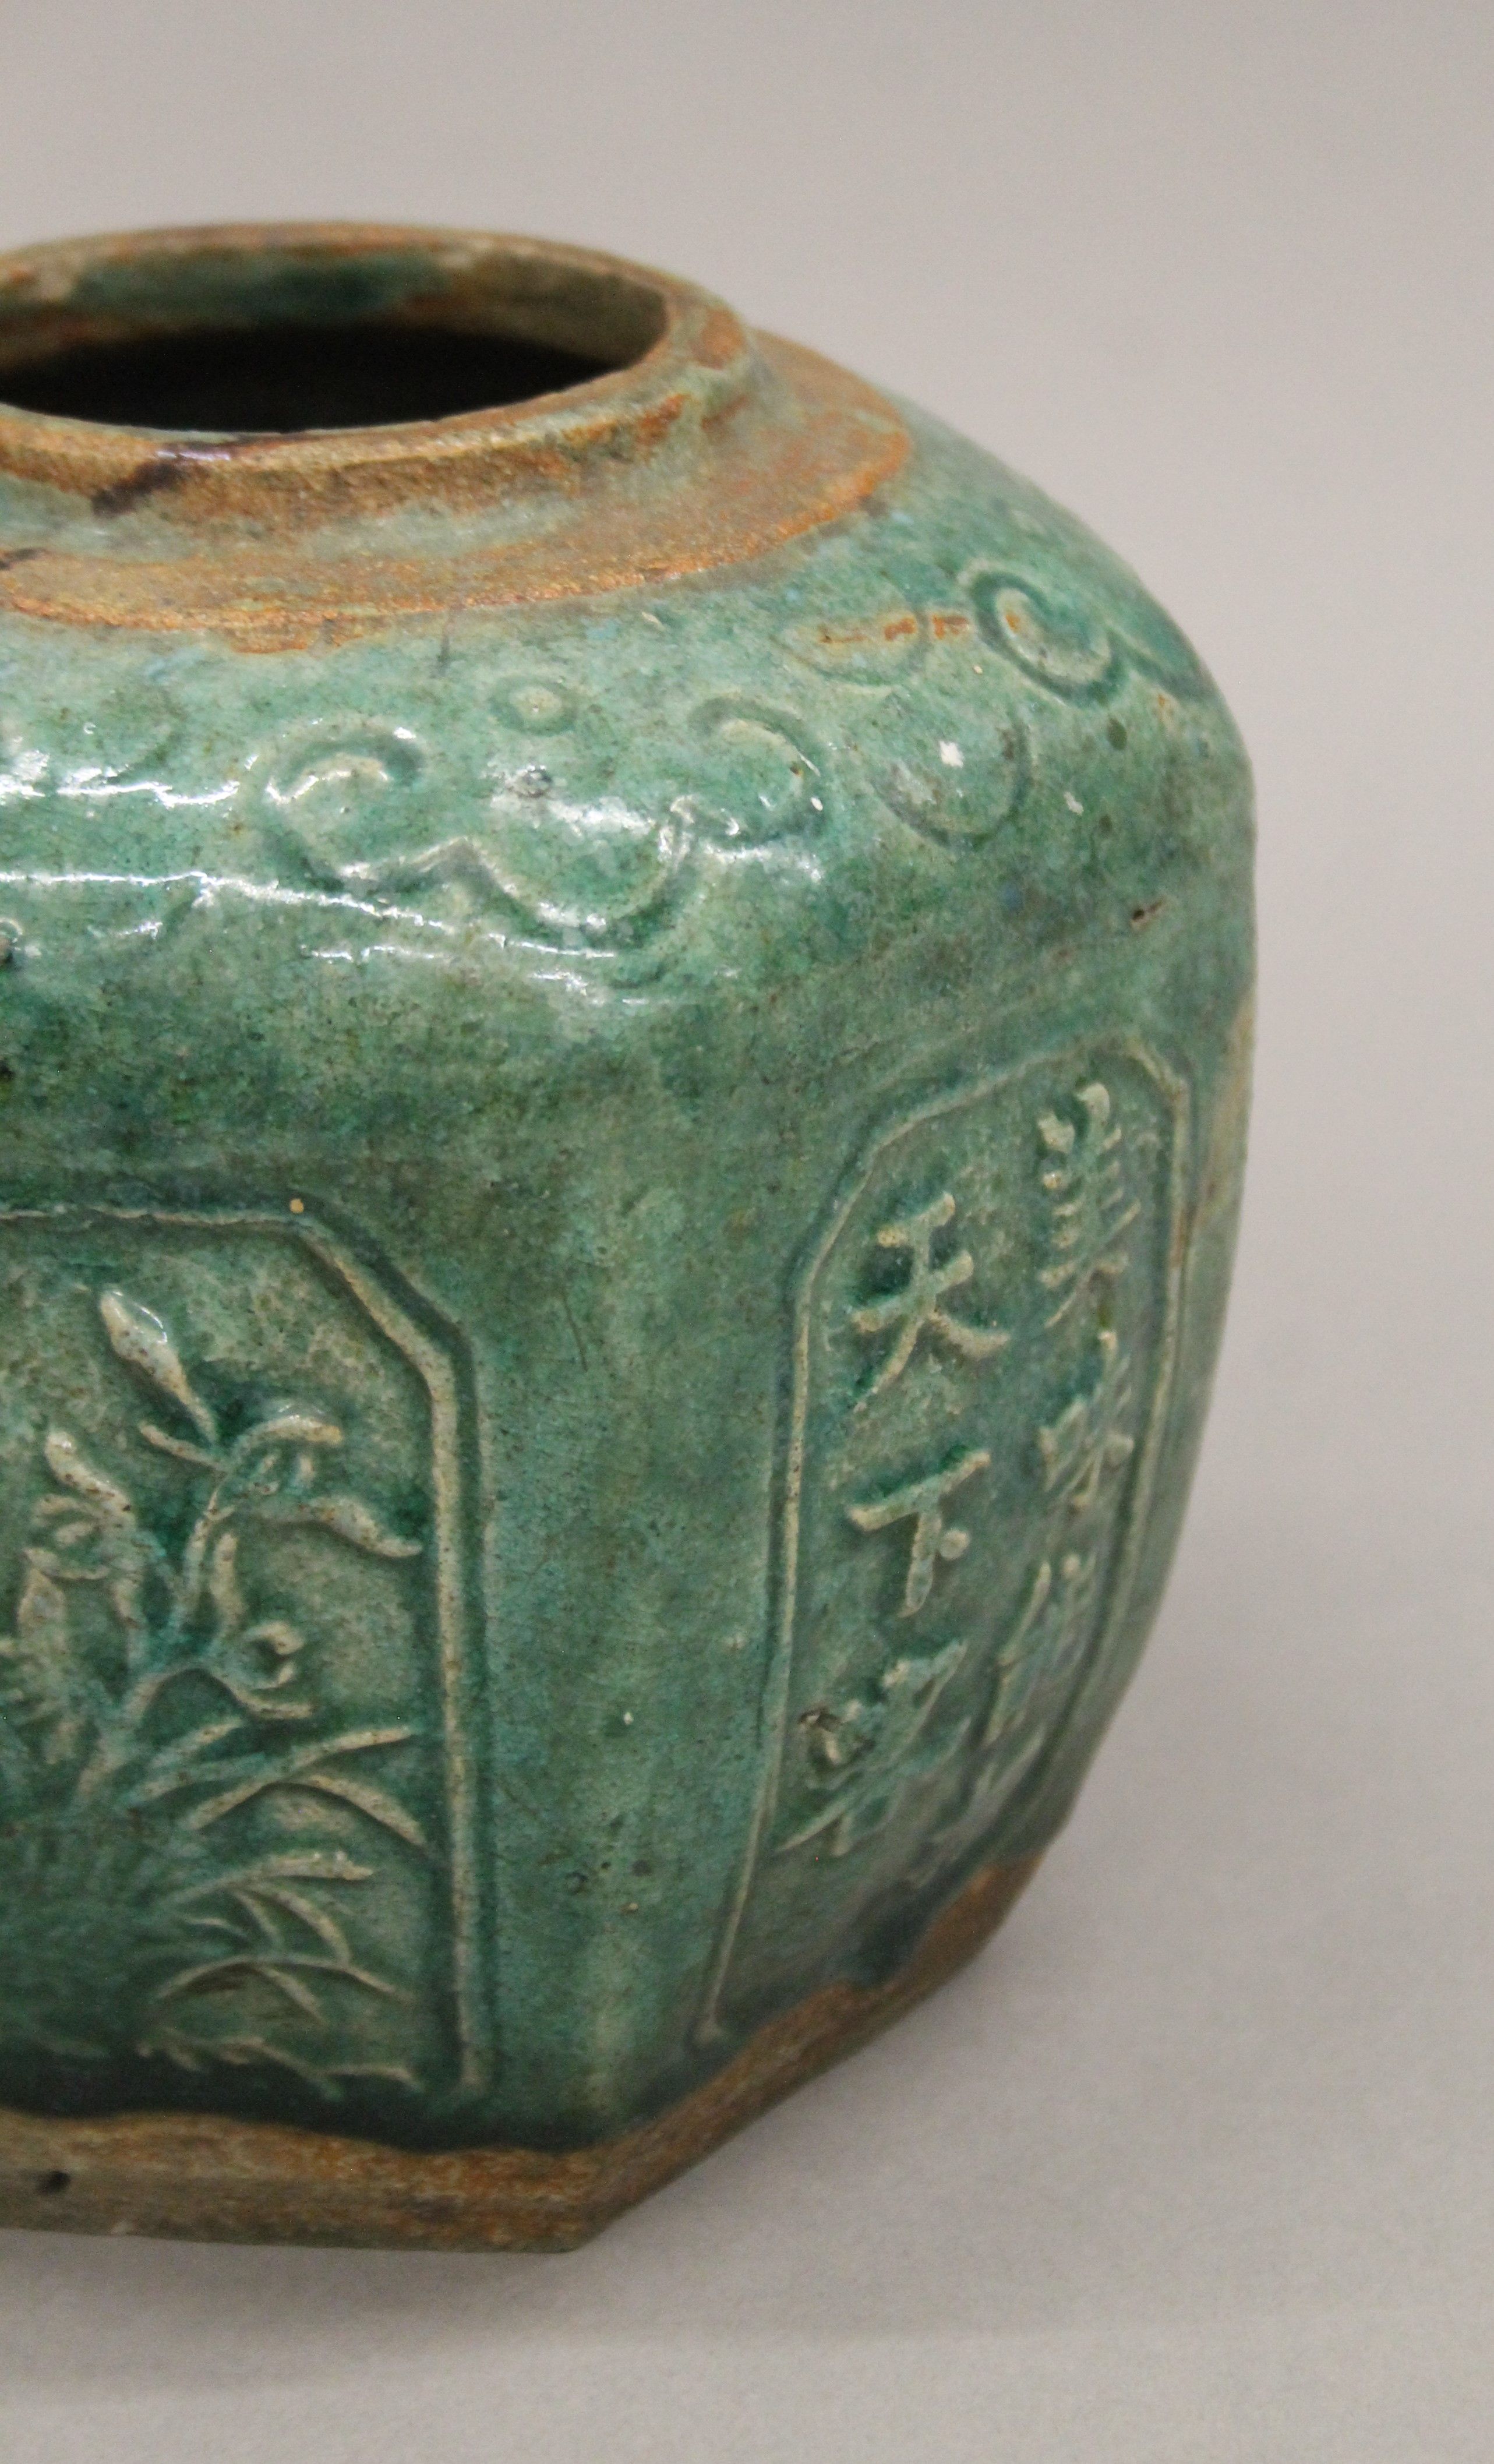 A Chinese green glazed jar, with panels of floral and calligraphy decoration. 14.5 cm high. - Image 3 of 5